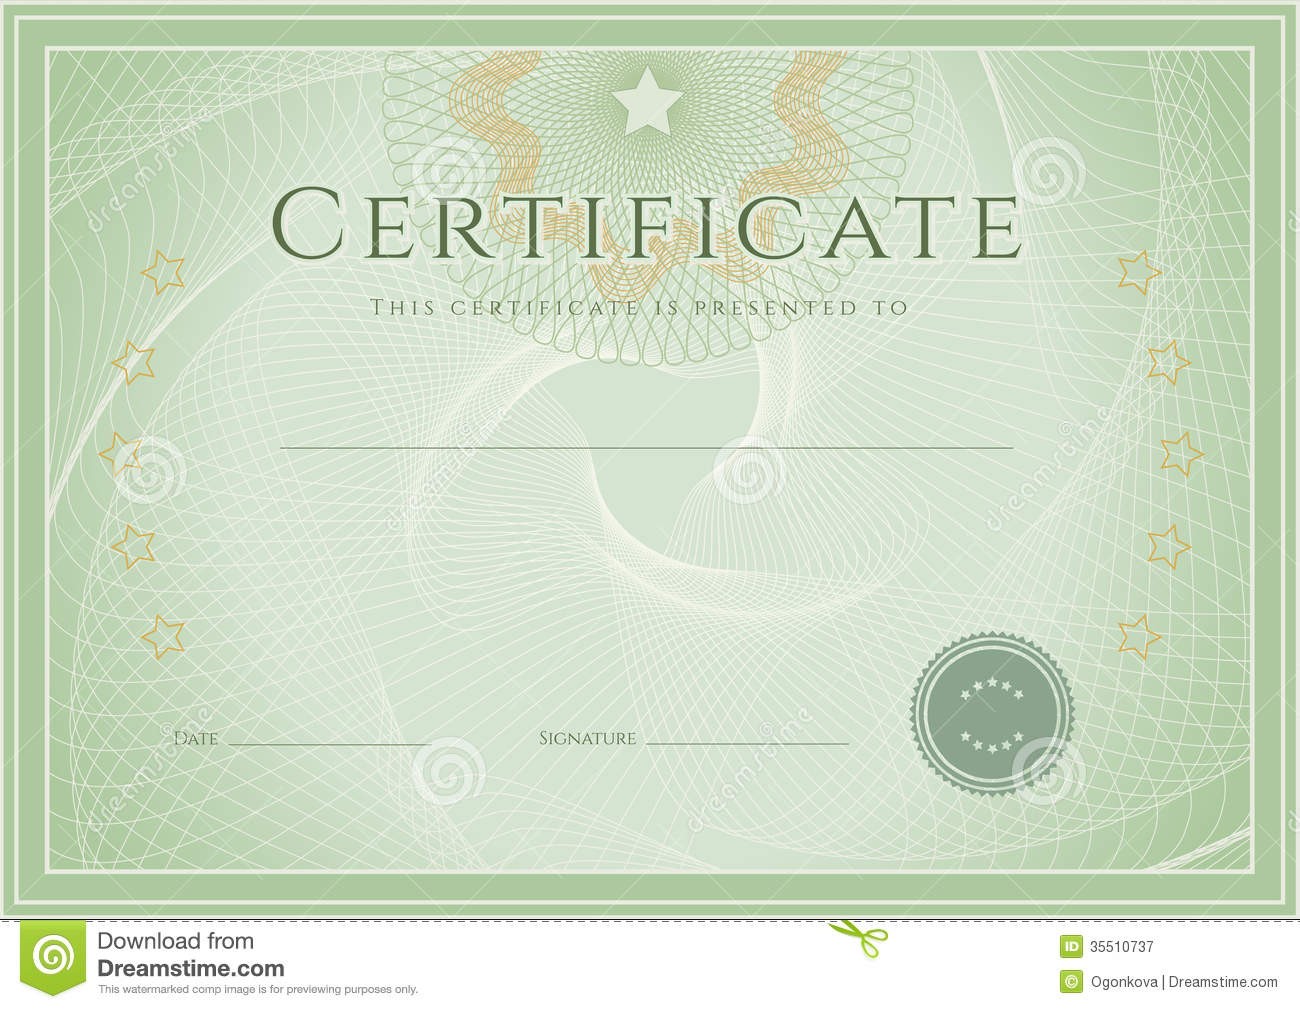 Certificate Diploma Award Template Grunge Patte Stock Vector Blank Templates Without